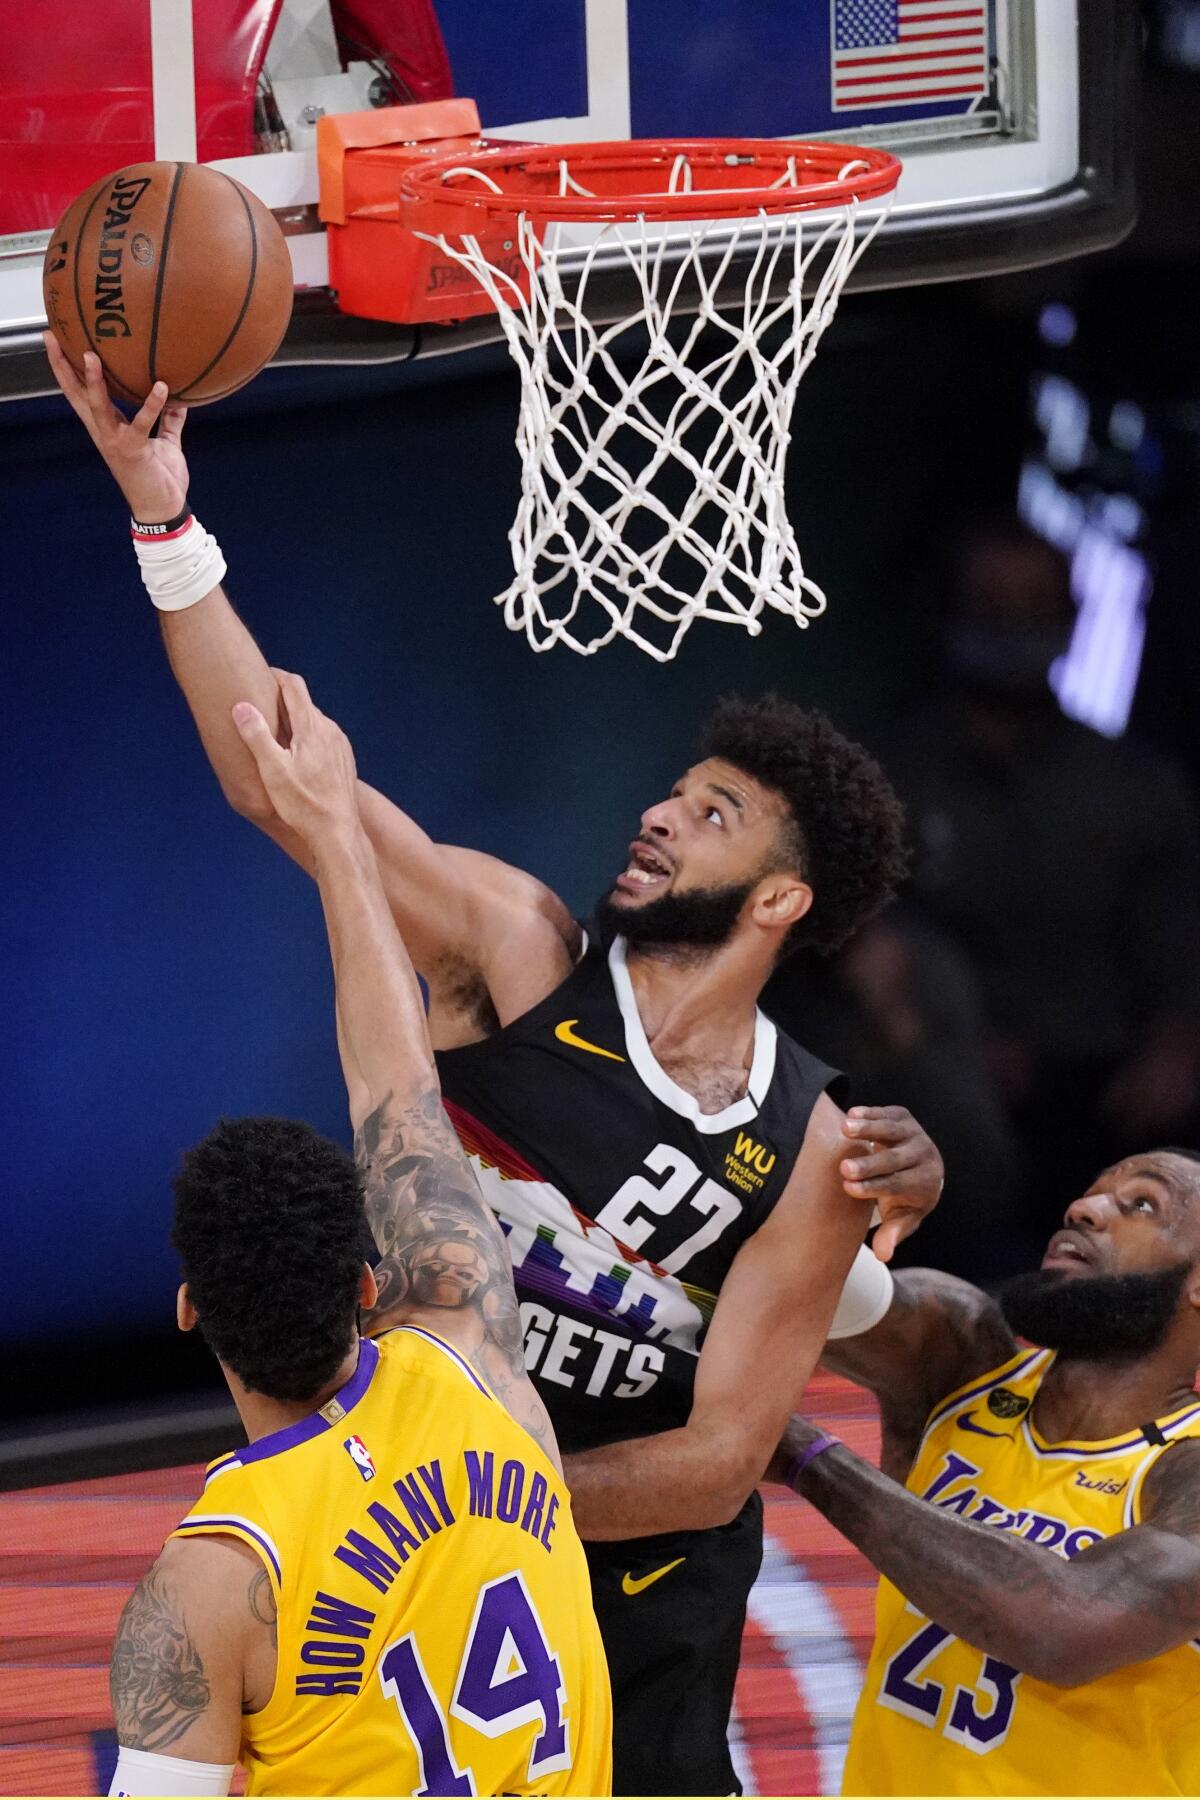 Nuggets guard Jamal Murray drives to the basket against Lakers guard Danny Green and forward LeBron James during Game 4